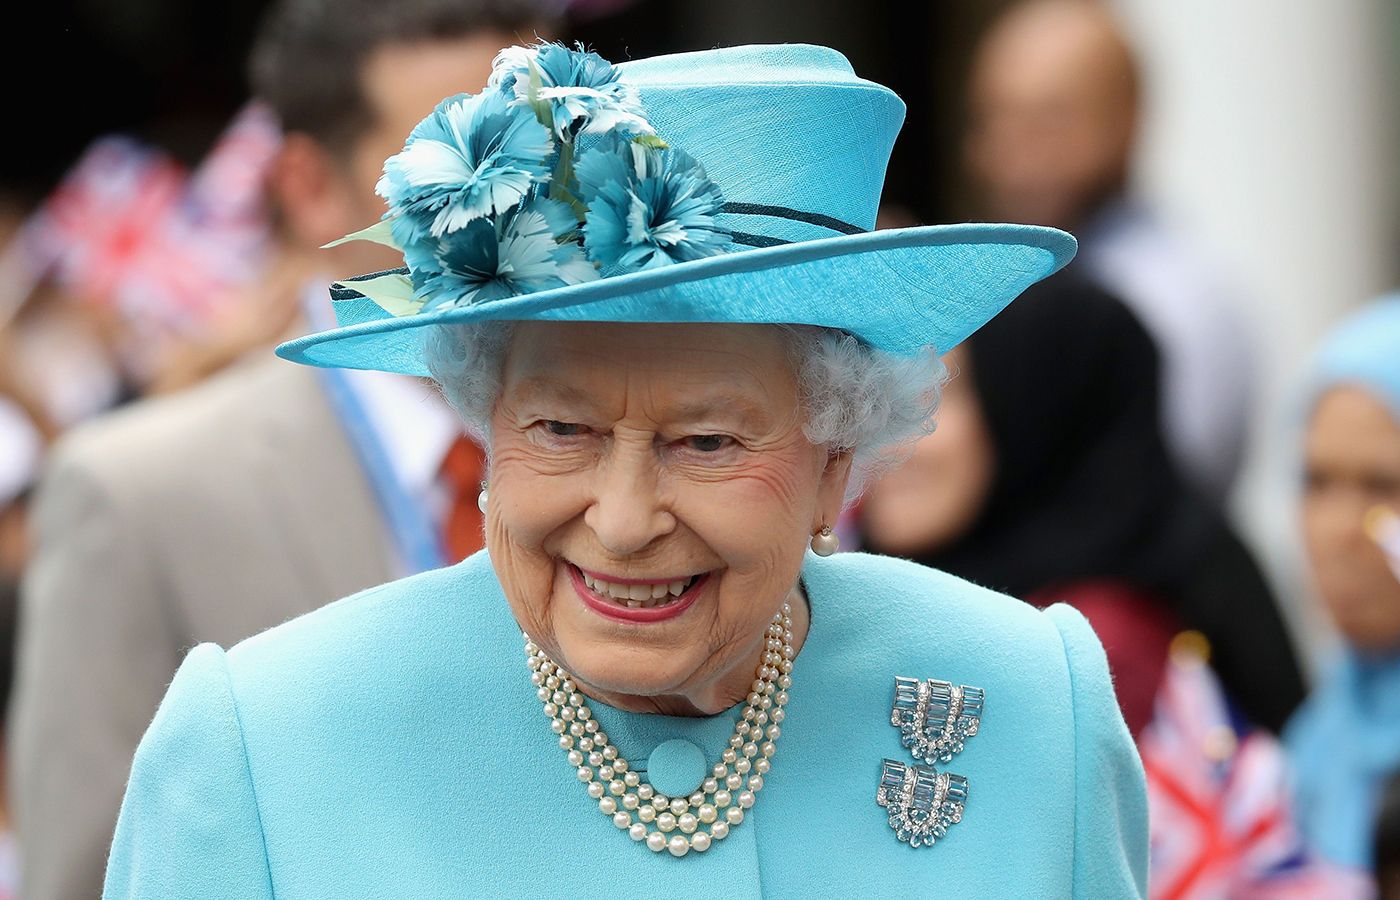 What Are The Brooches The Queen Wears